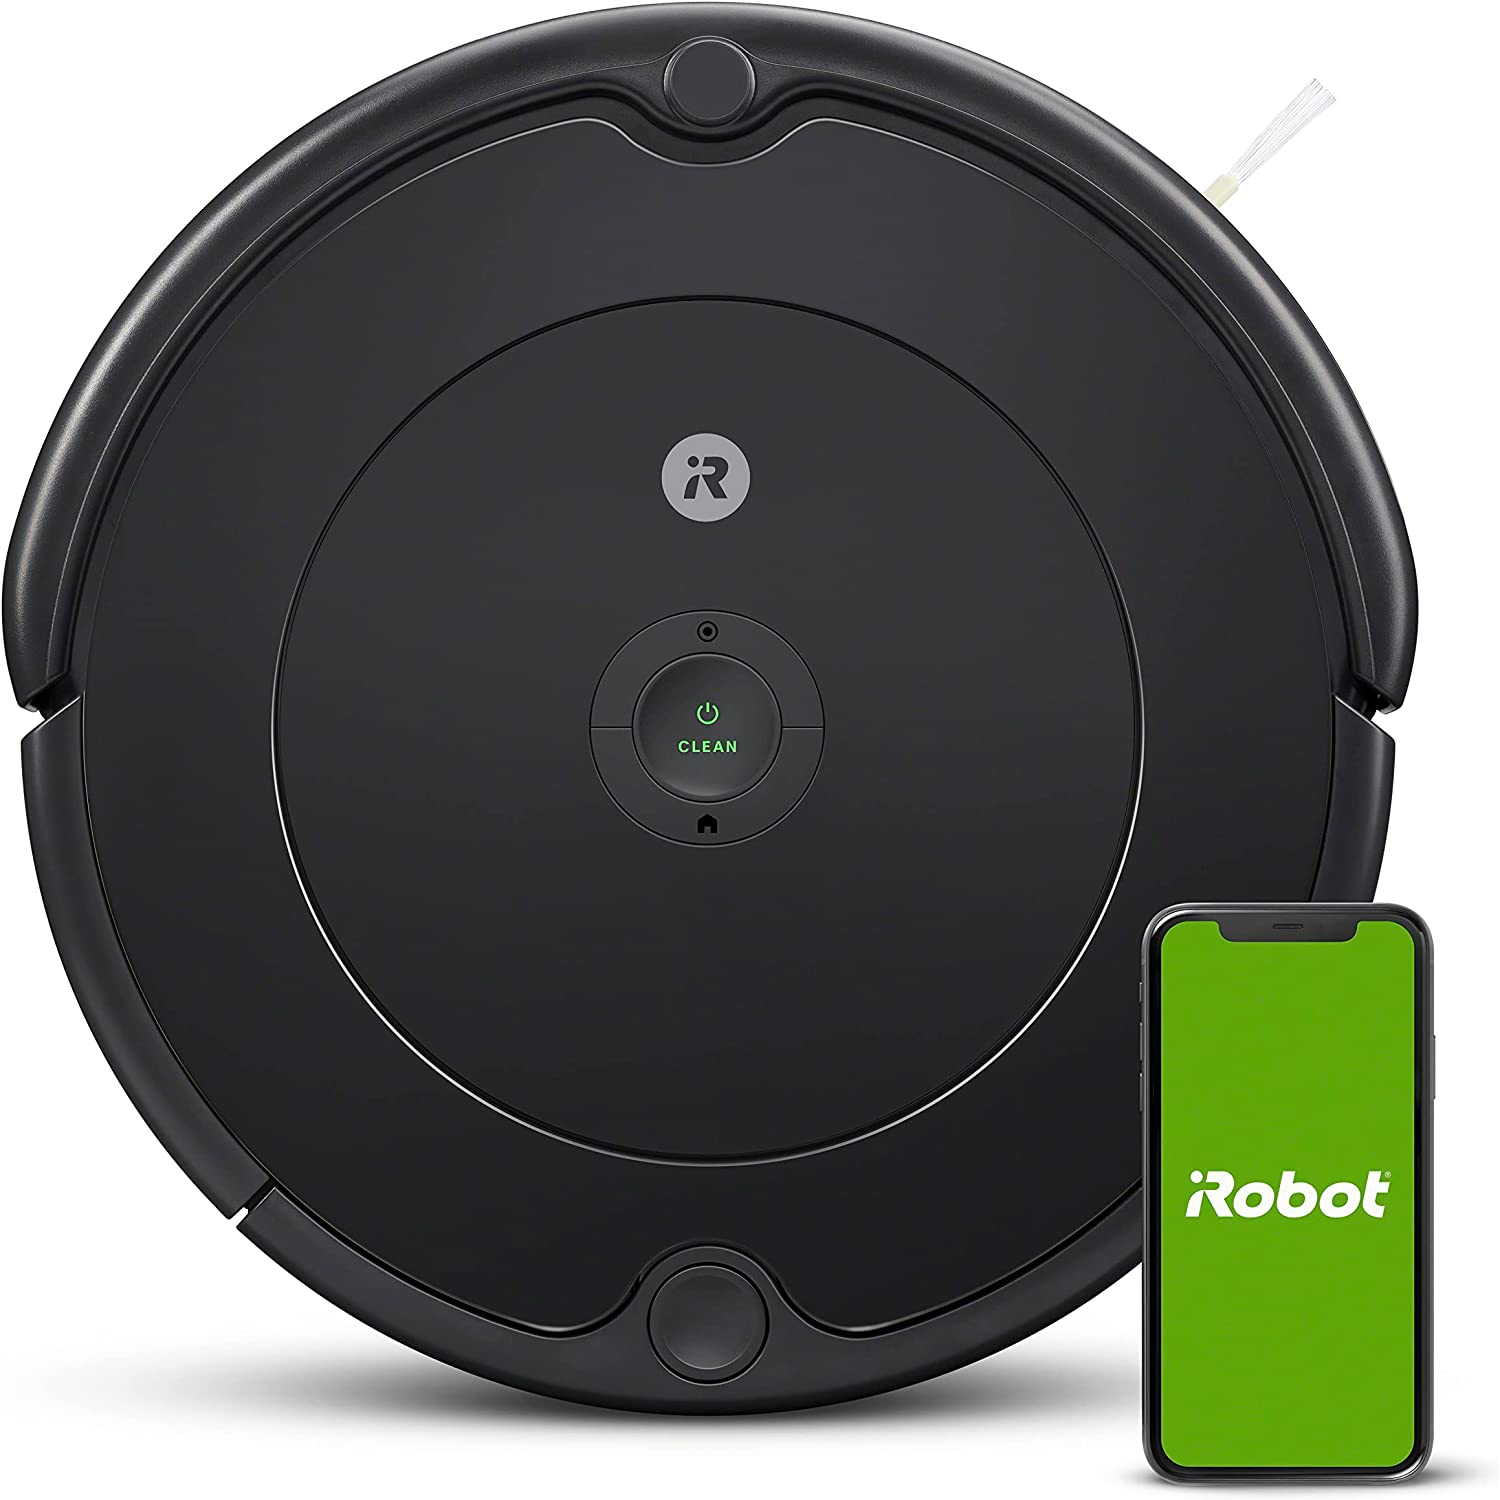 irobot vacuum, one of the best valentine's day gifts for couples, on a white background